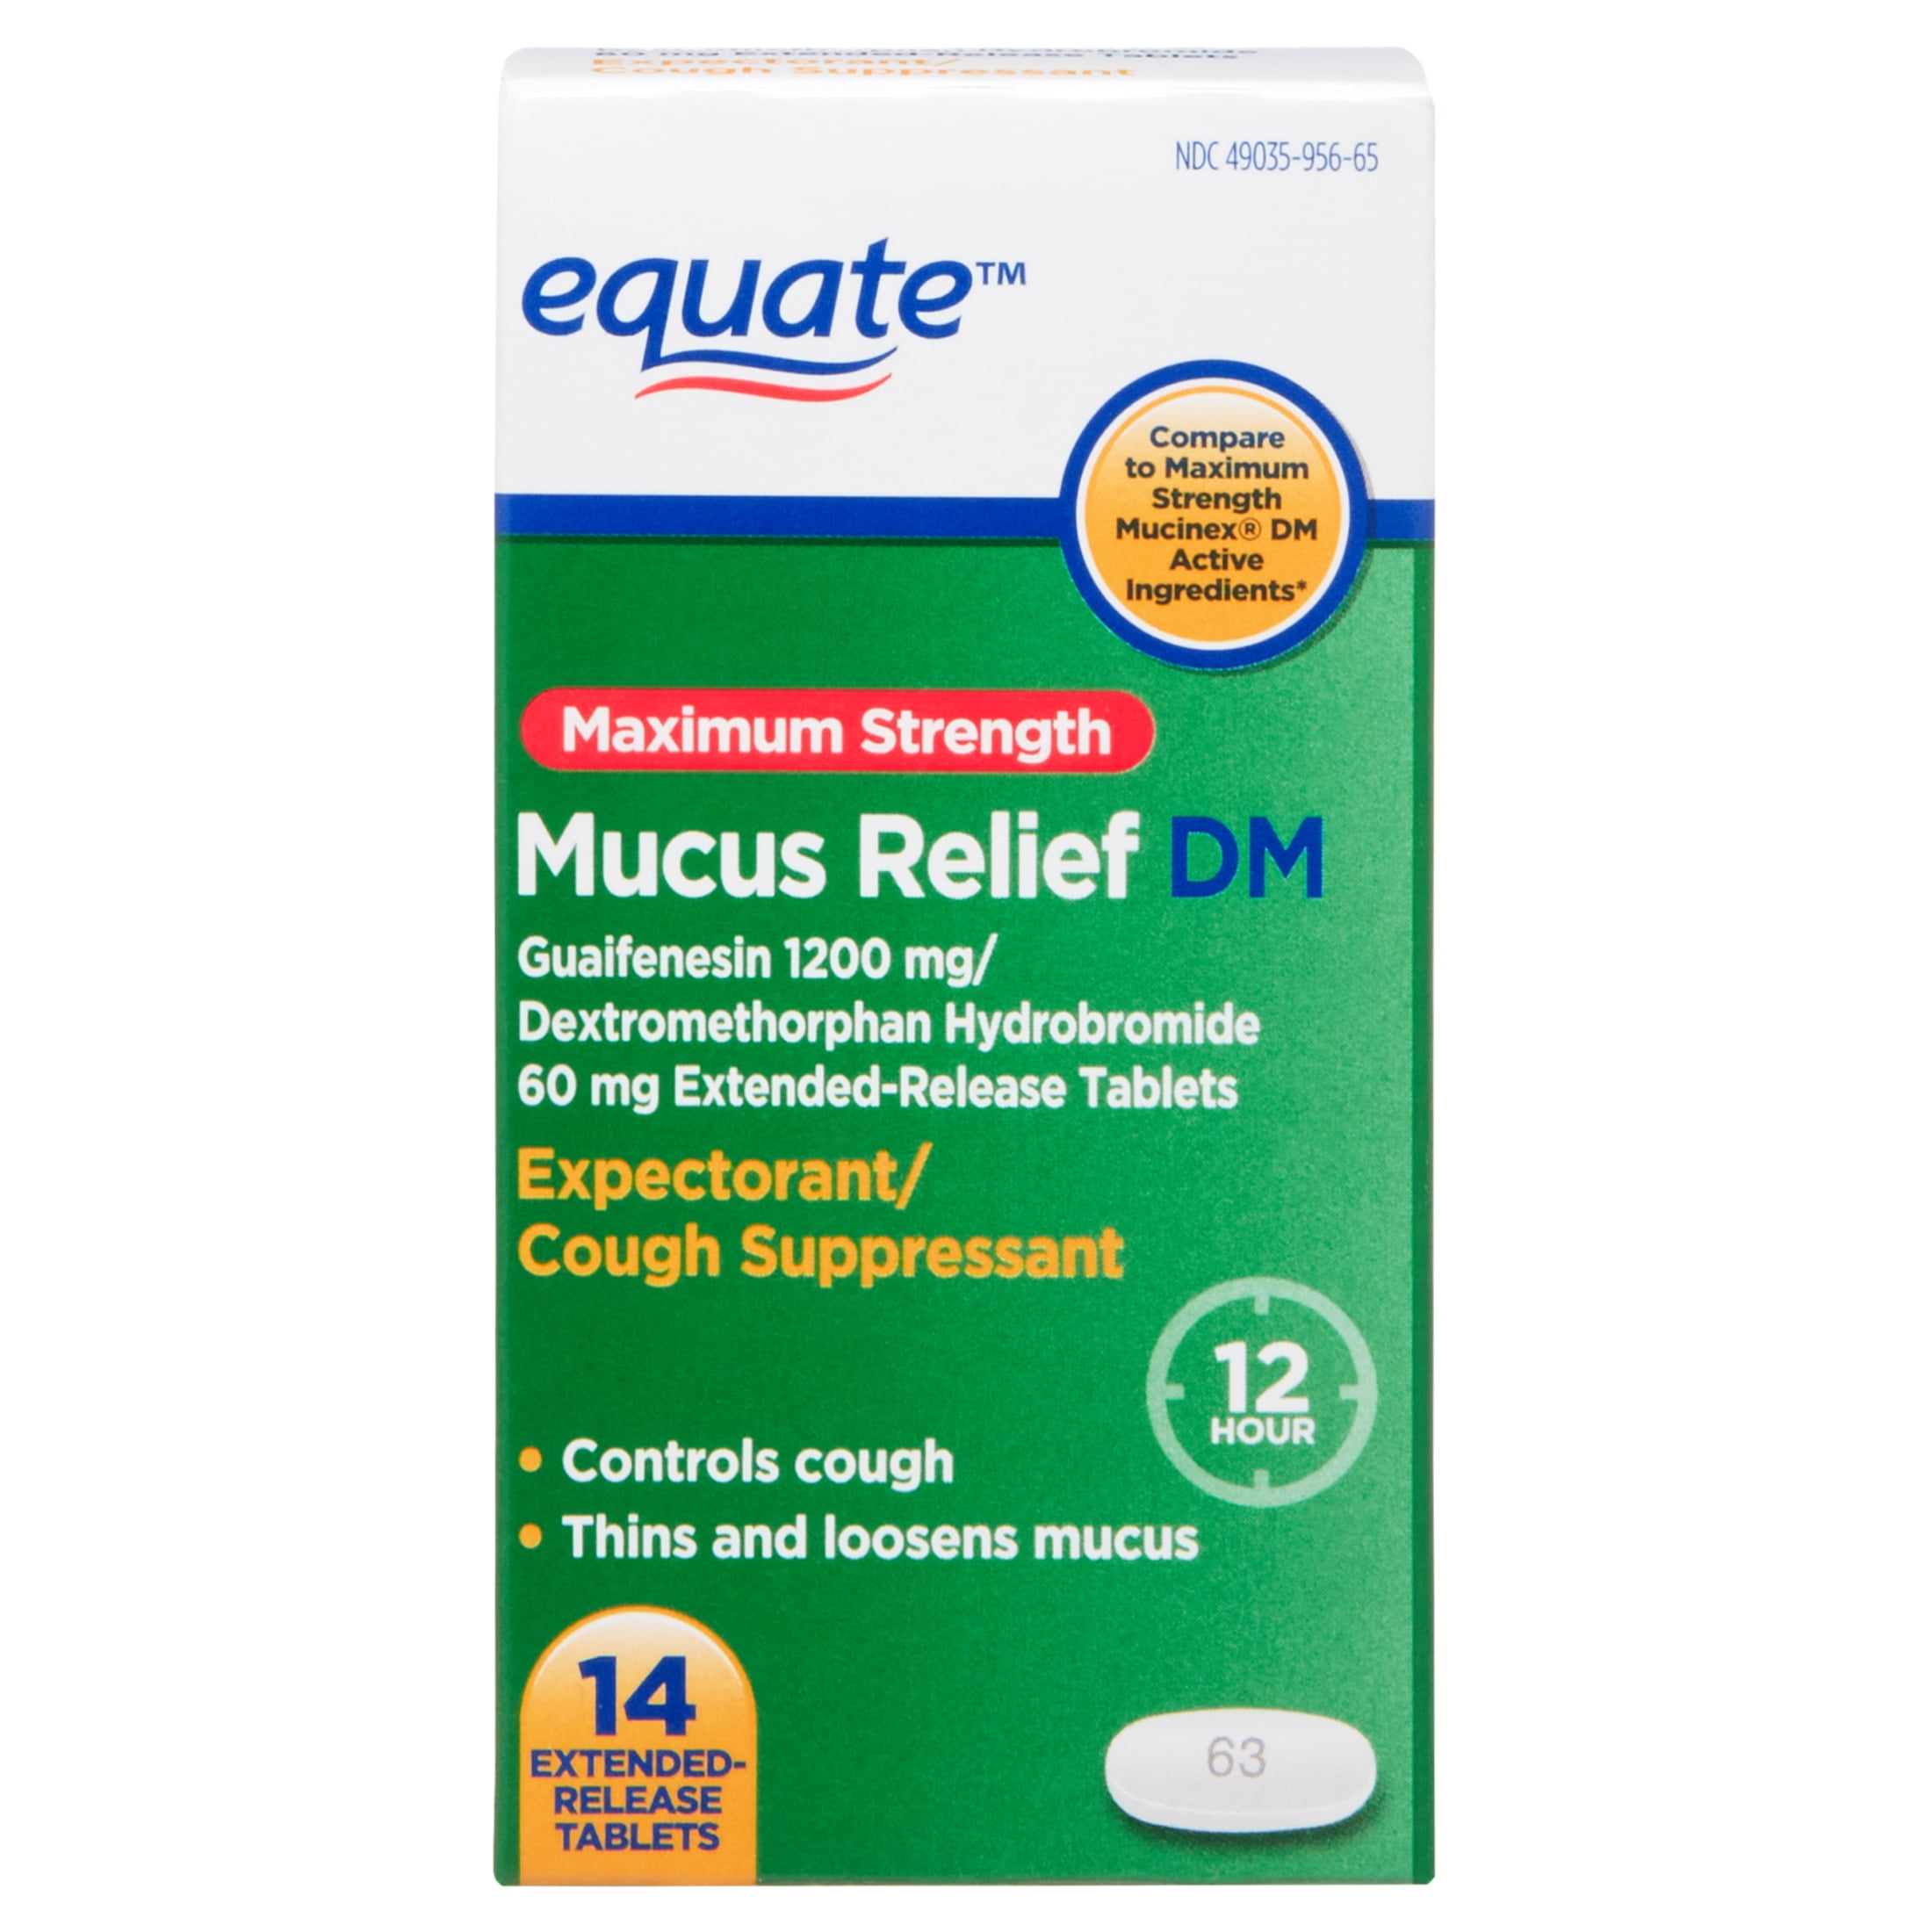 Equate Mucus Relief Max Strength, Cough Suppressant DM Tablets, 14 Count